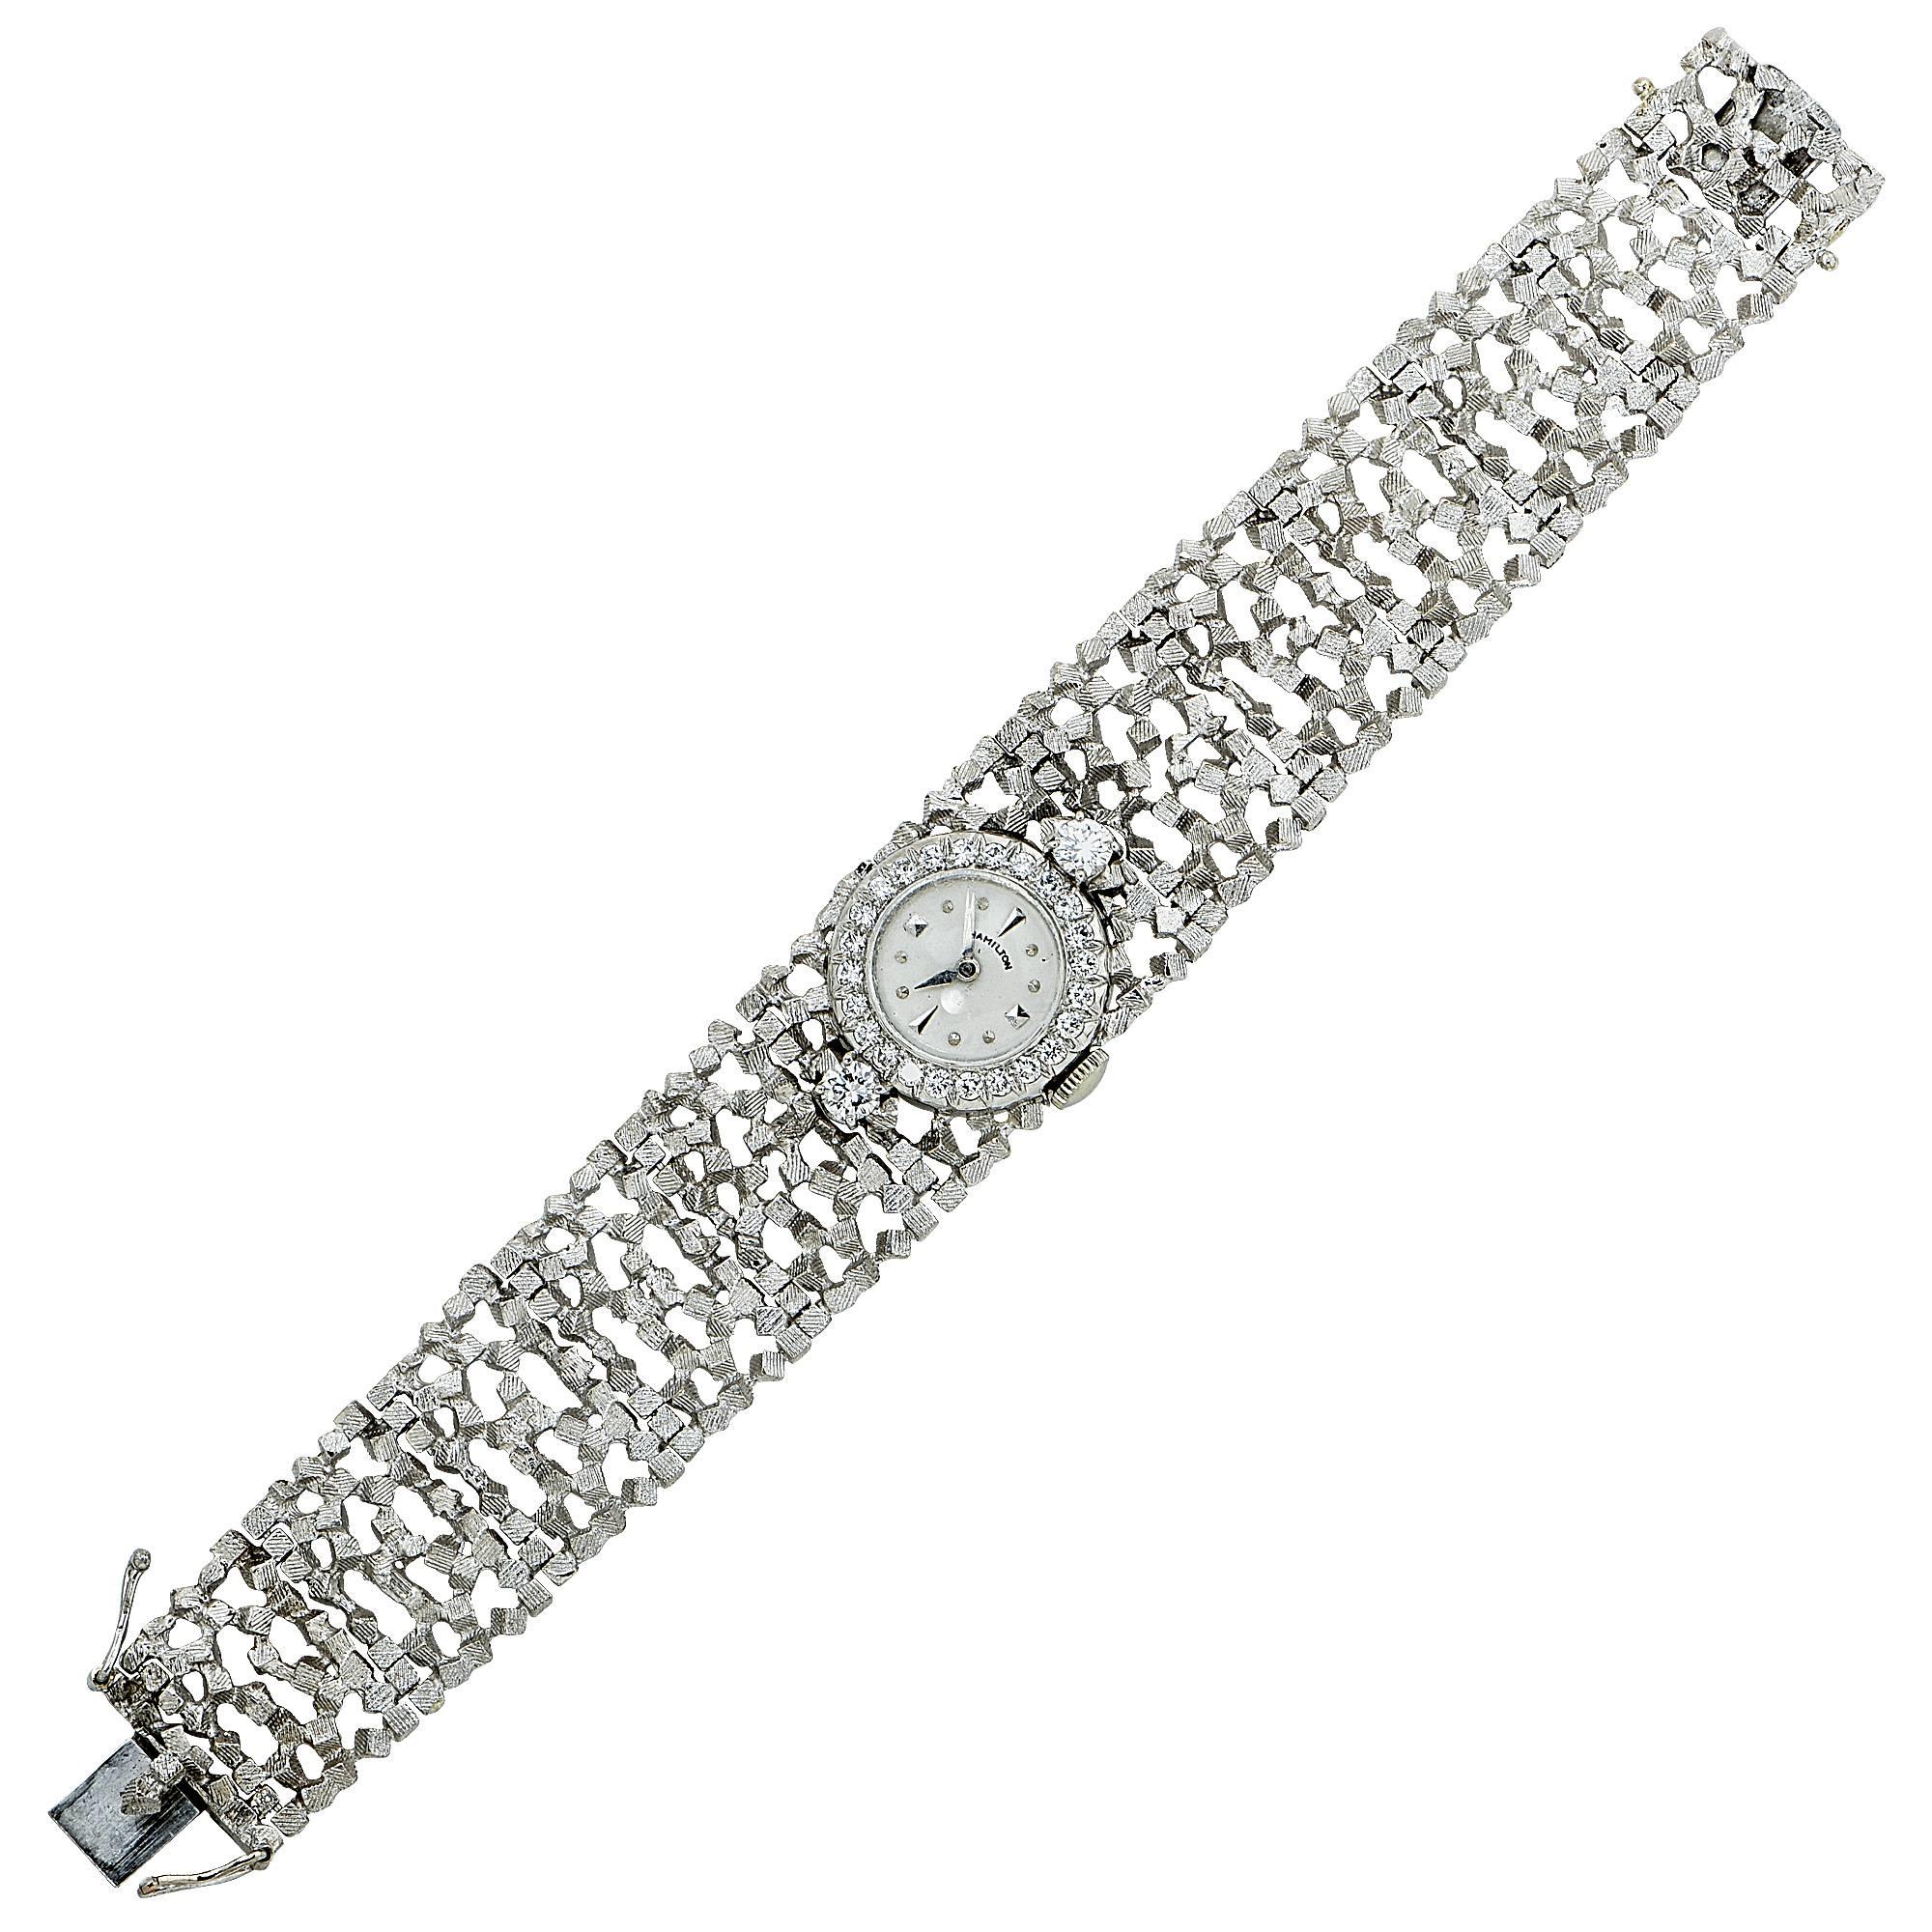 Platinum and 18k white gold John Donald, Hamilton watch, featuring 26 round brilliant cut diamonds weighing approximately 1.1cts total, G color VS clarity. 

Metal weight: 42.60 grams

This diamond ring is accompanied by a retail appraisal